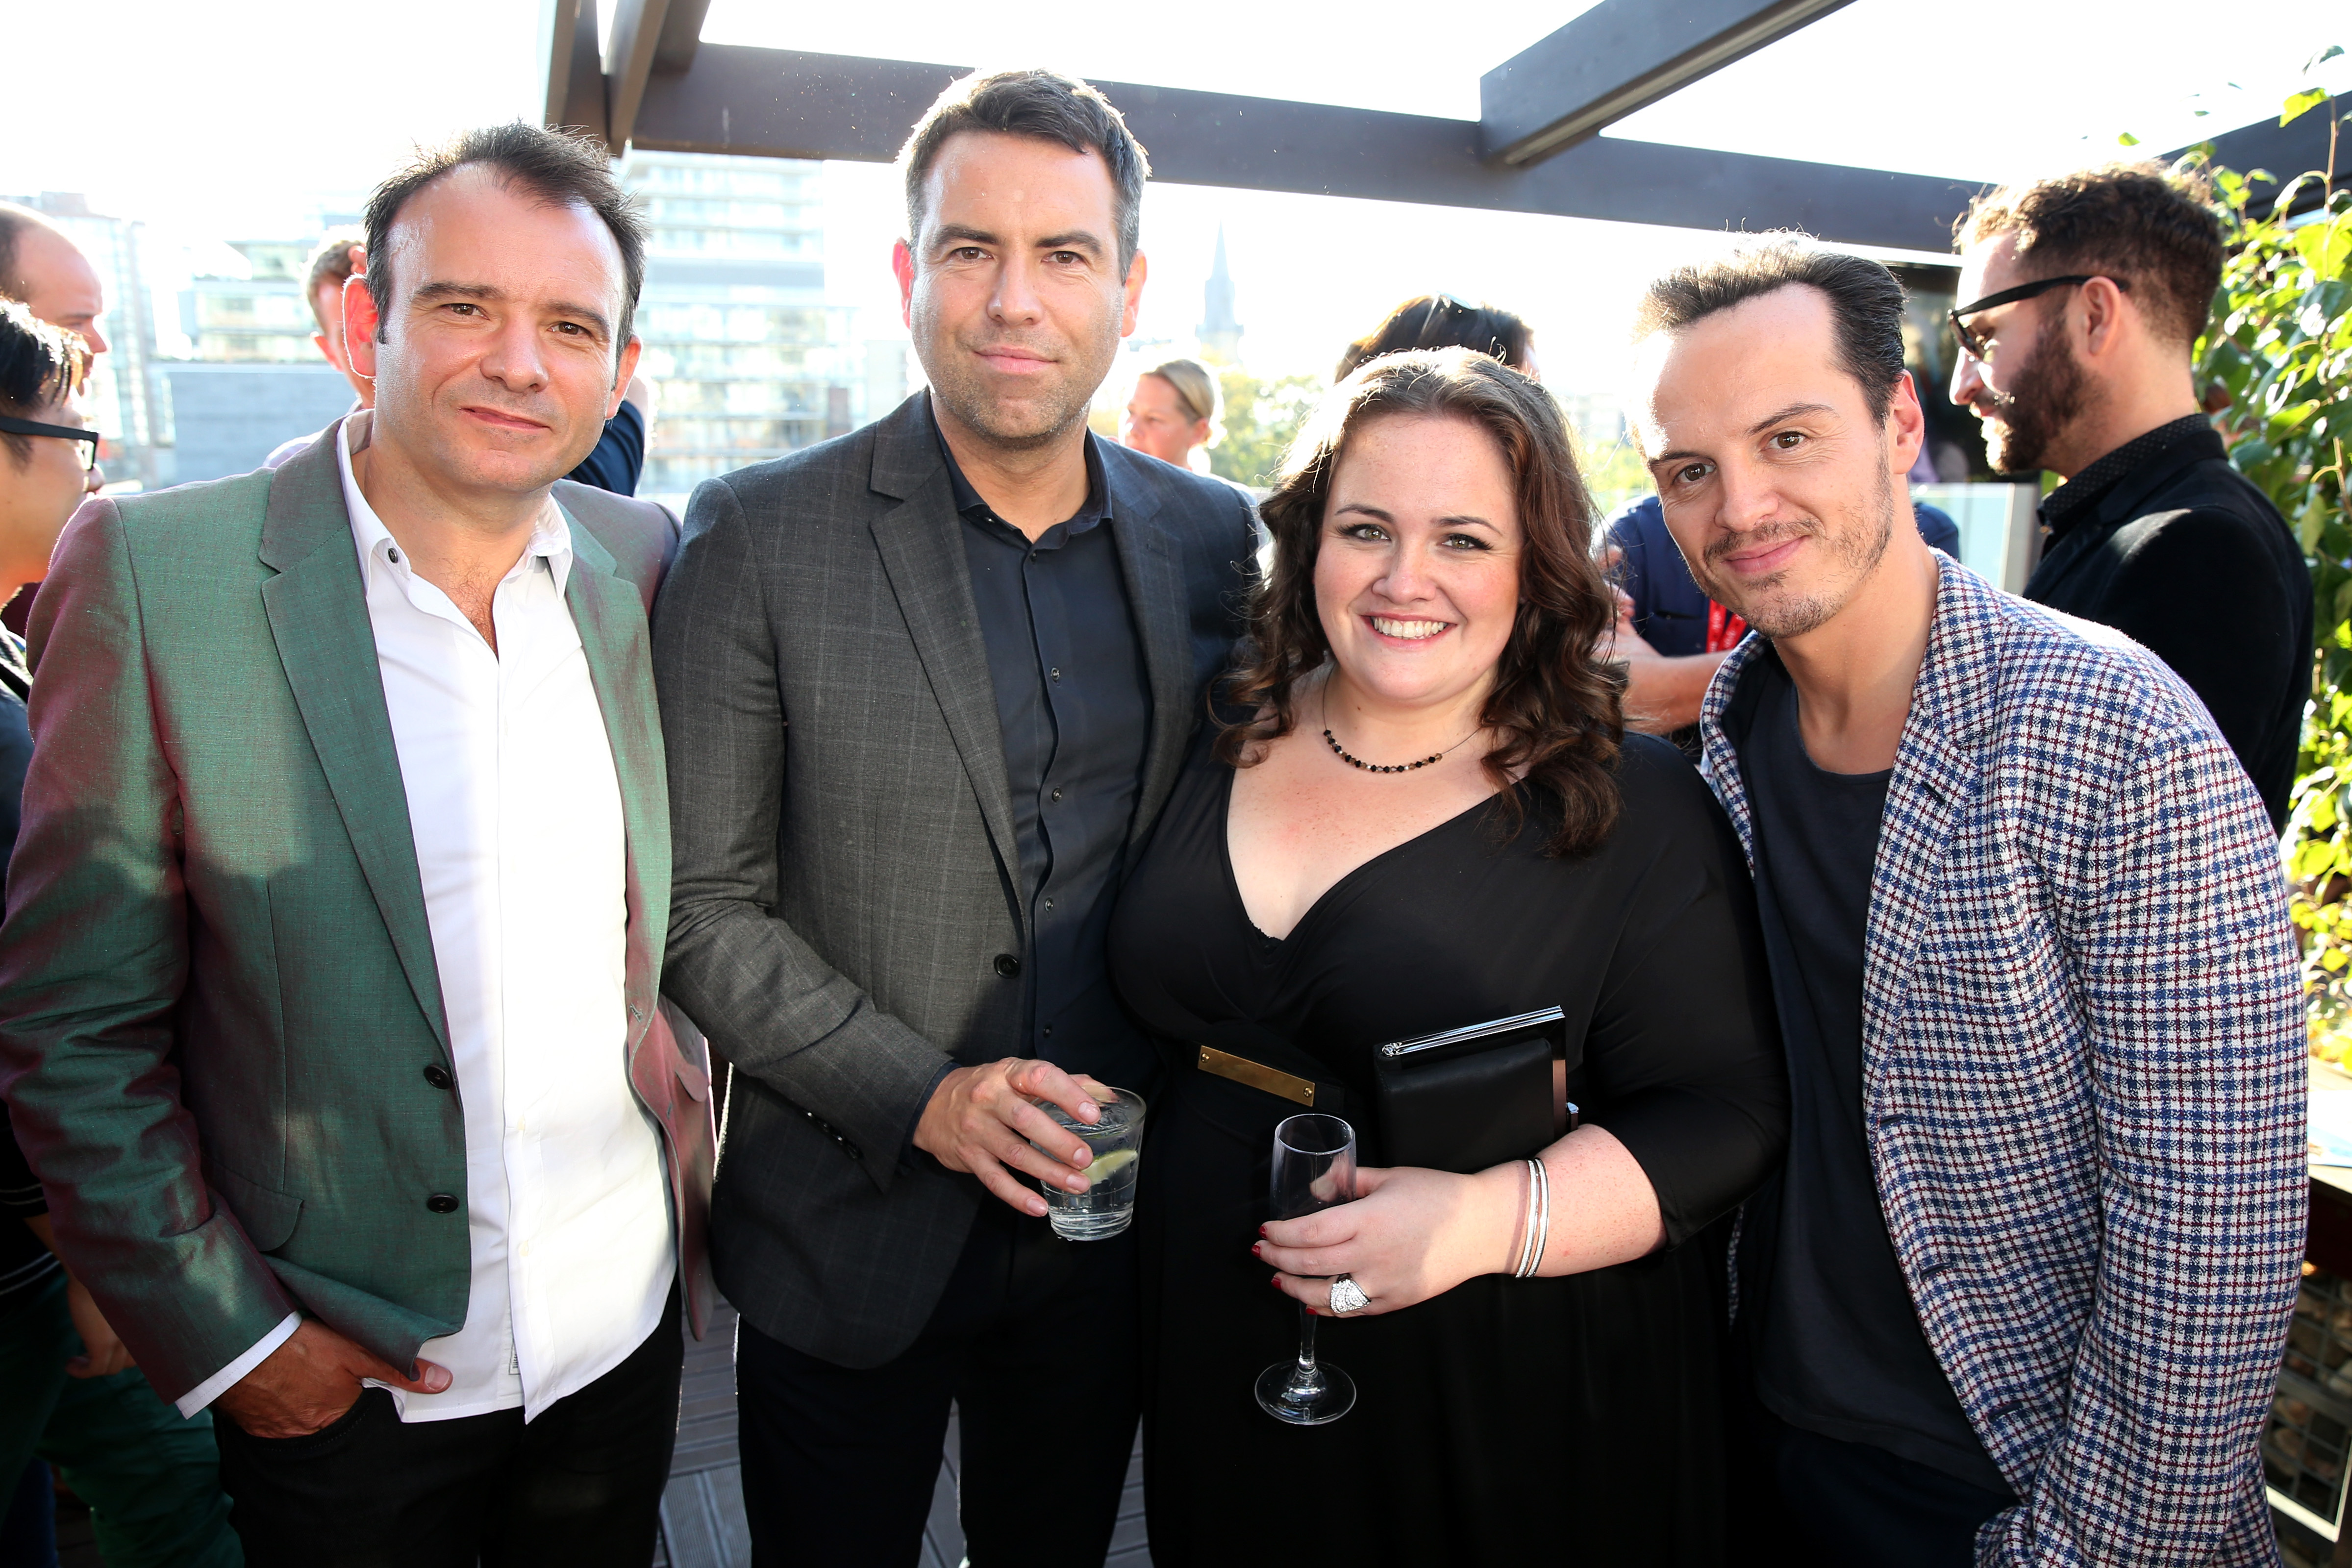 Director Matthew Warchus, writer Stephen Beresford, actors Jessica Gunning and Andrew Scott attend the British Film Commission We are UK Film Party during the 2014 Toronto International Film Festival held at the Spoke Club on September 8, 2014, in Toronto, Canada | Source: Getty Images